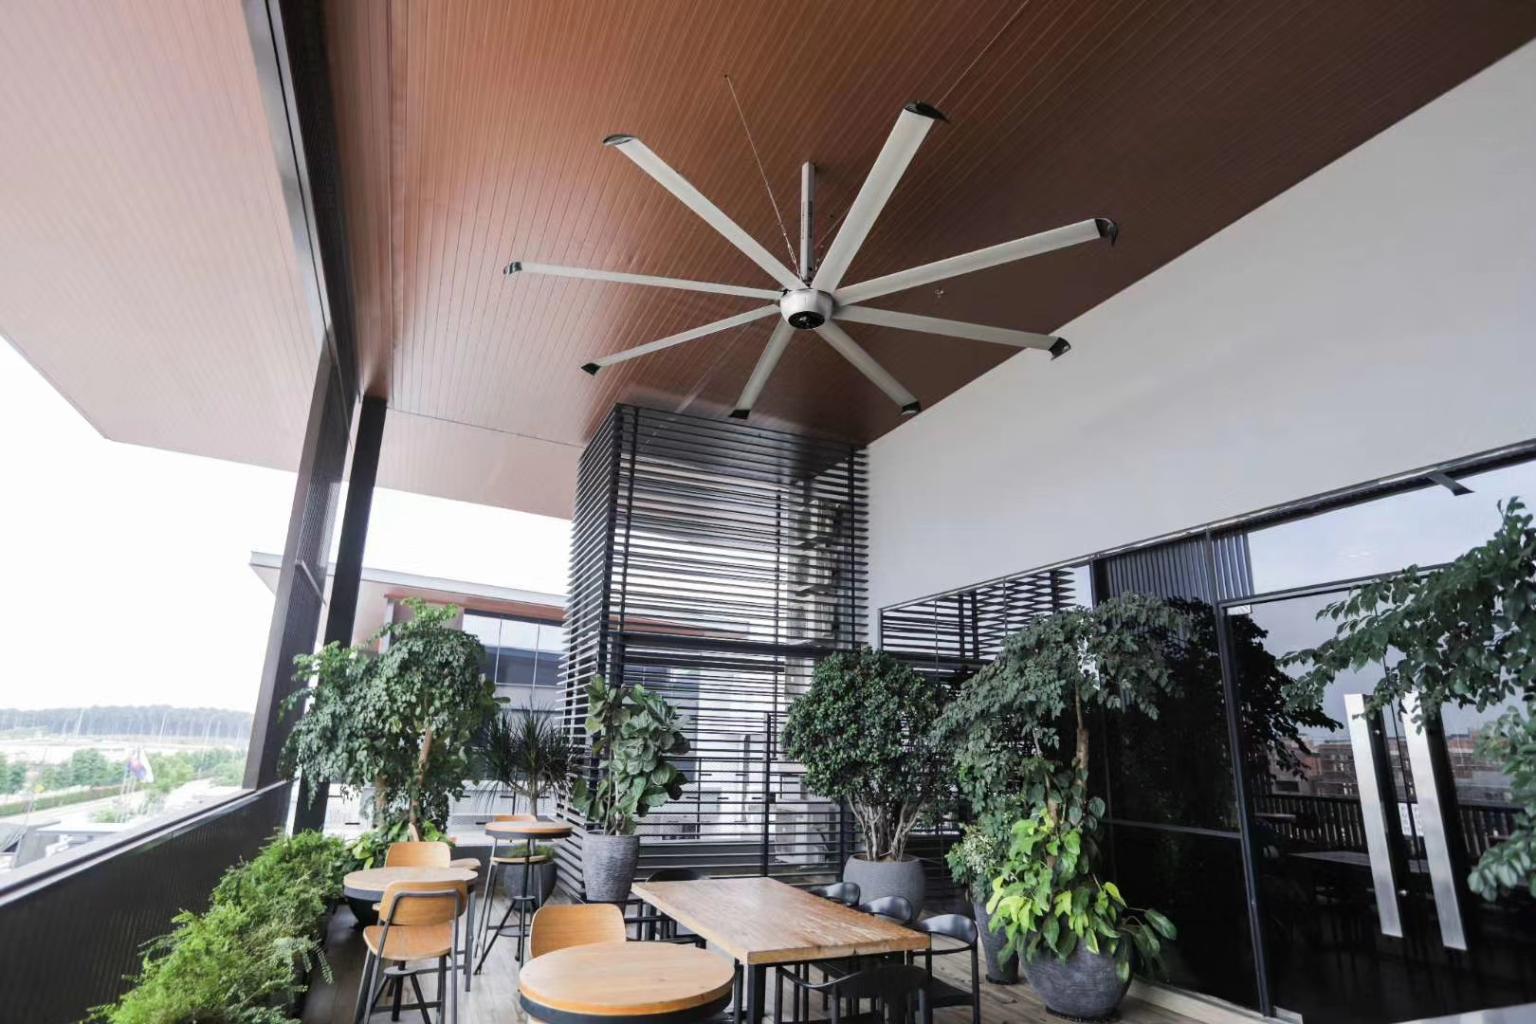 the Function of HVLS Ceiling Fans